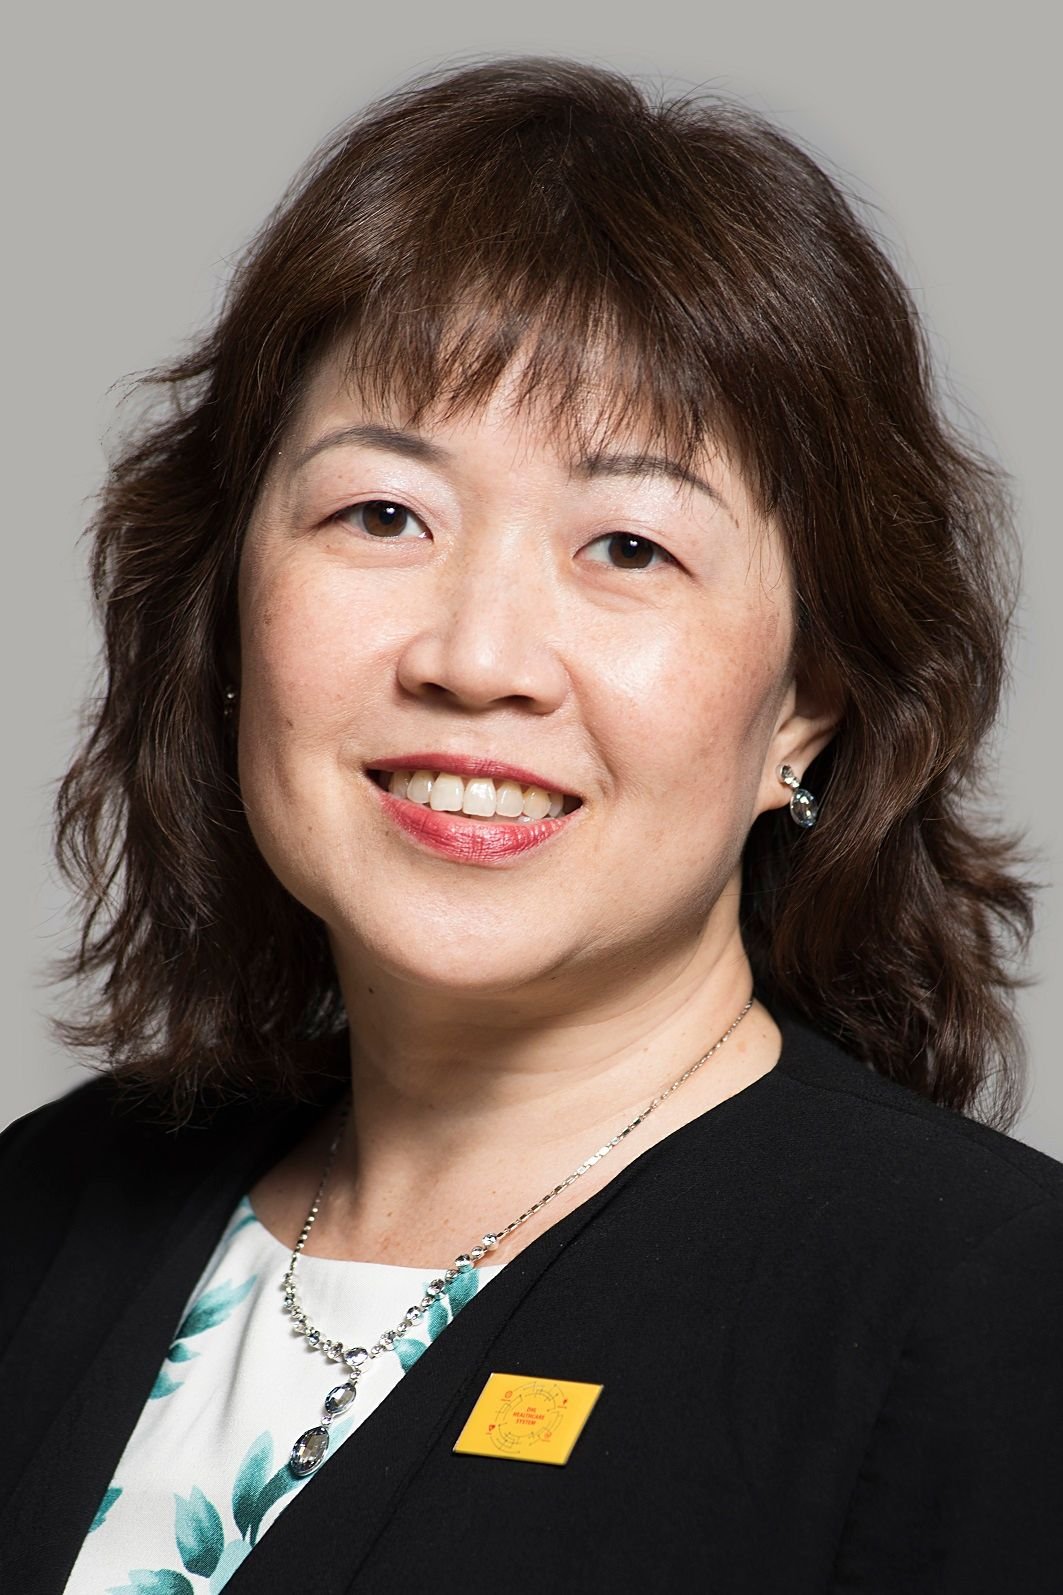 Leonora Lim, Vice President at DHL Customer Solutions and Innovation, Life Sciences and Healthcare